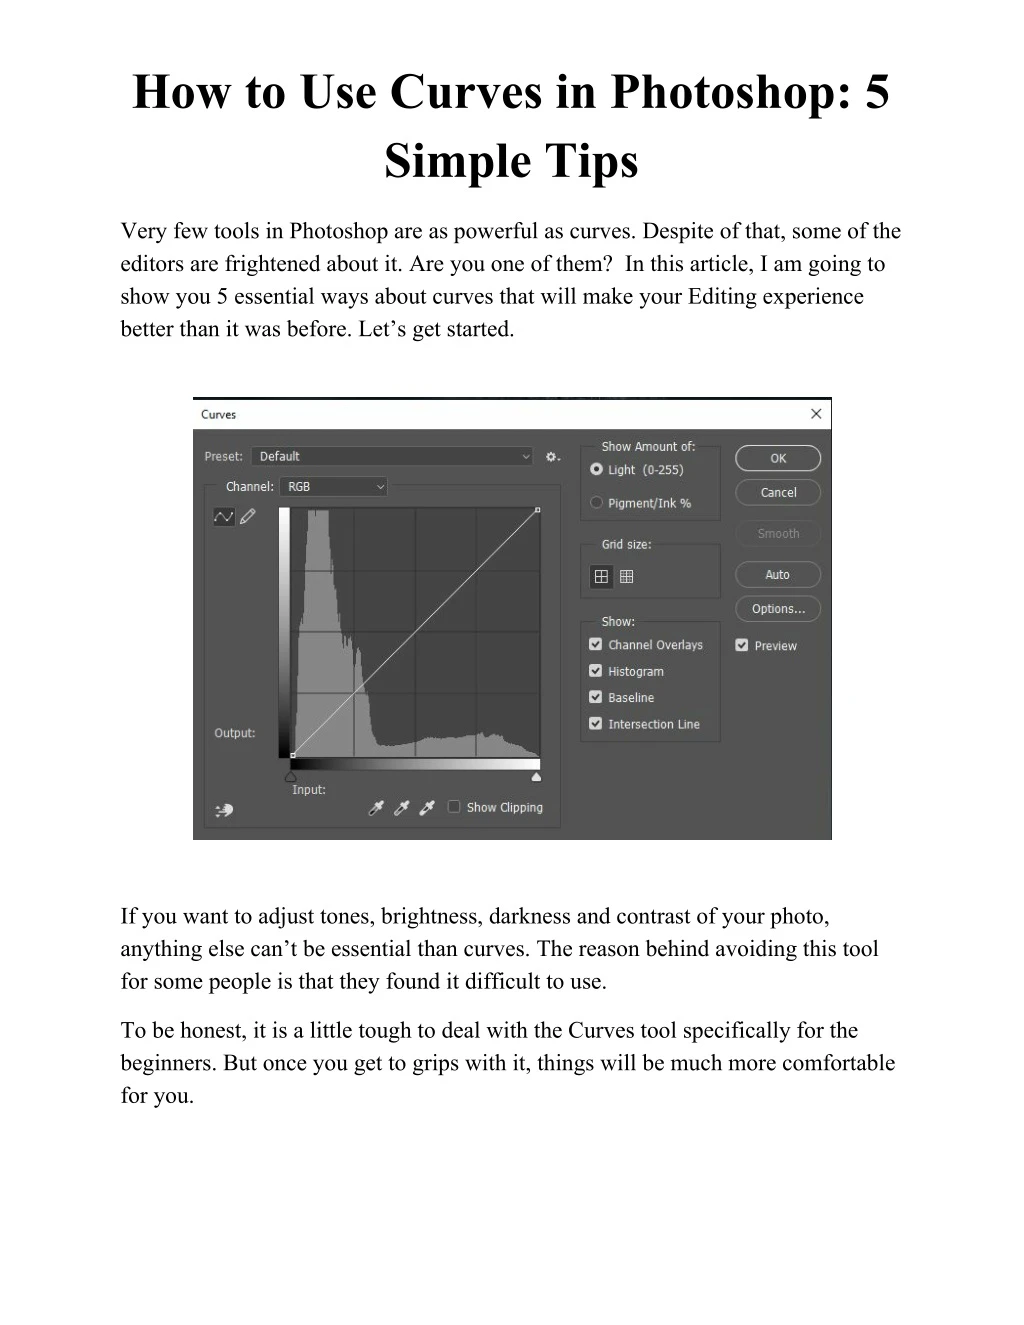 how to use curves in photoshop 5 simple tips